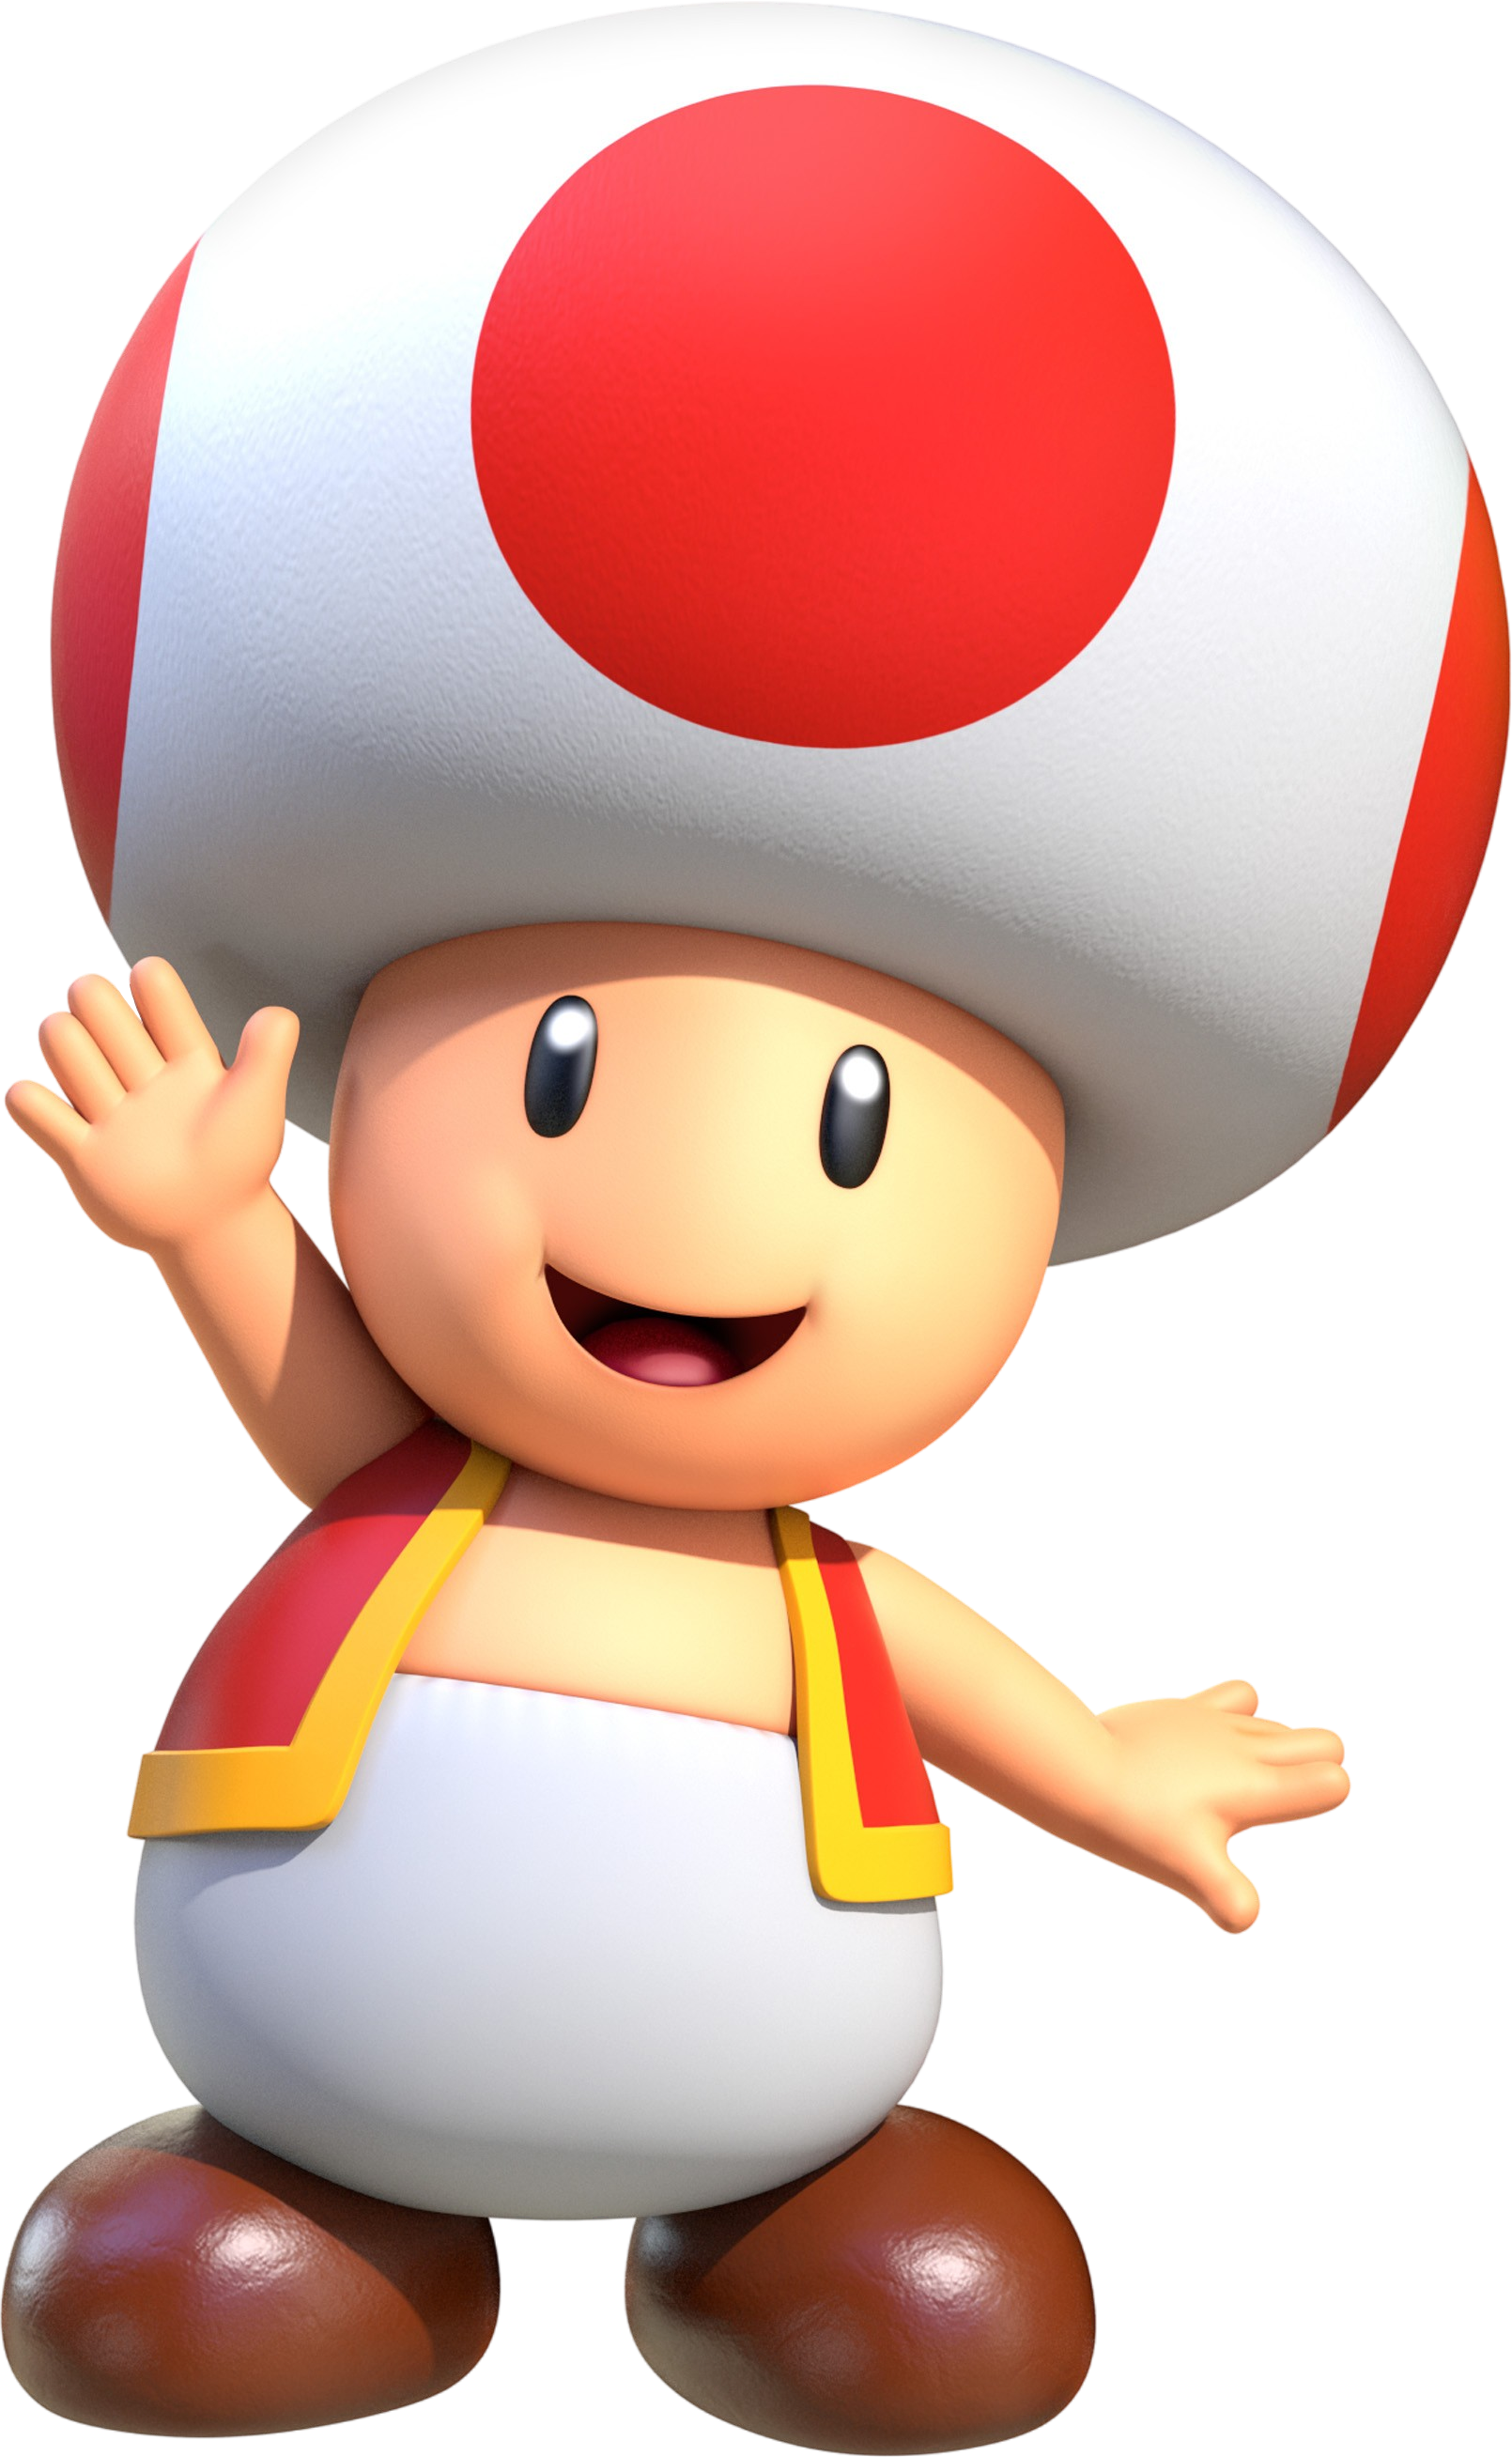 Artwork of a Red Toad from Super Mario Run.